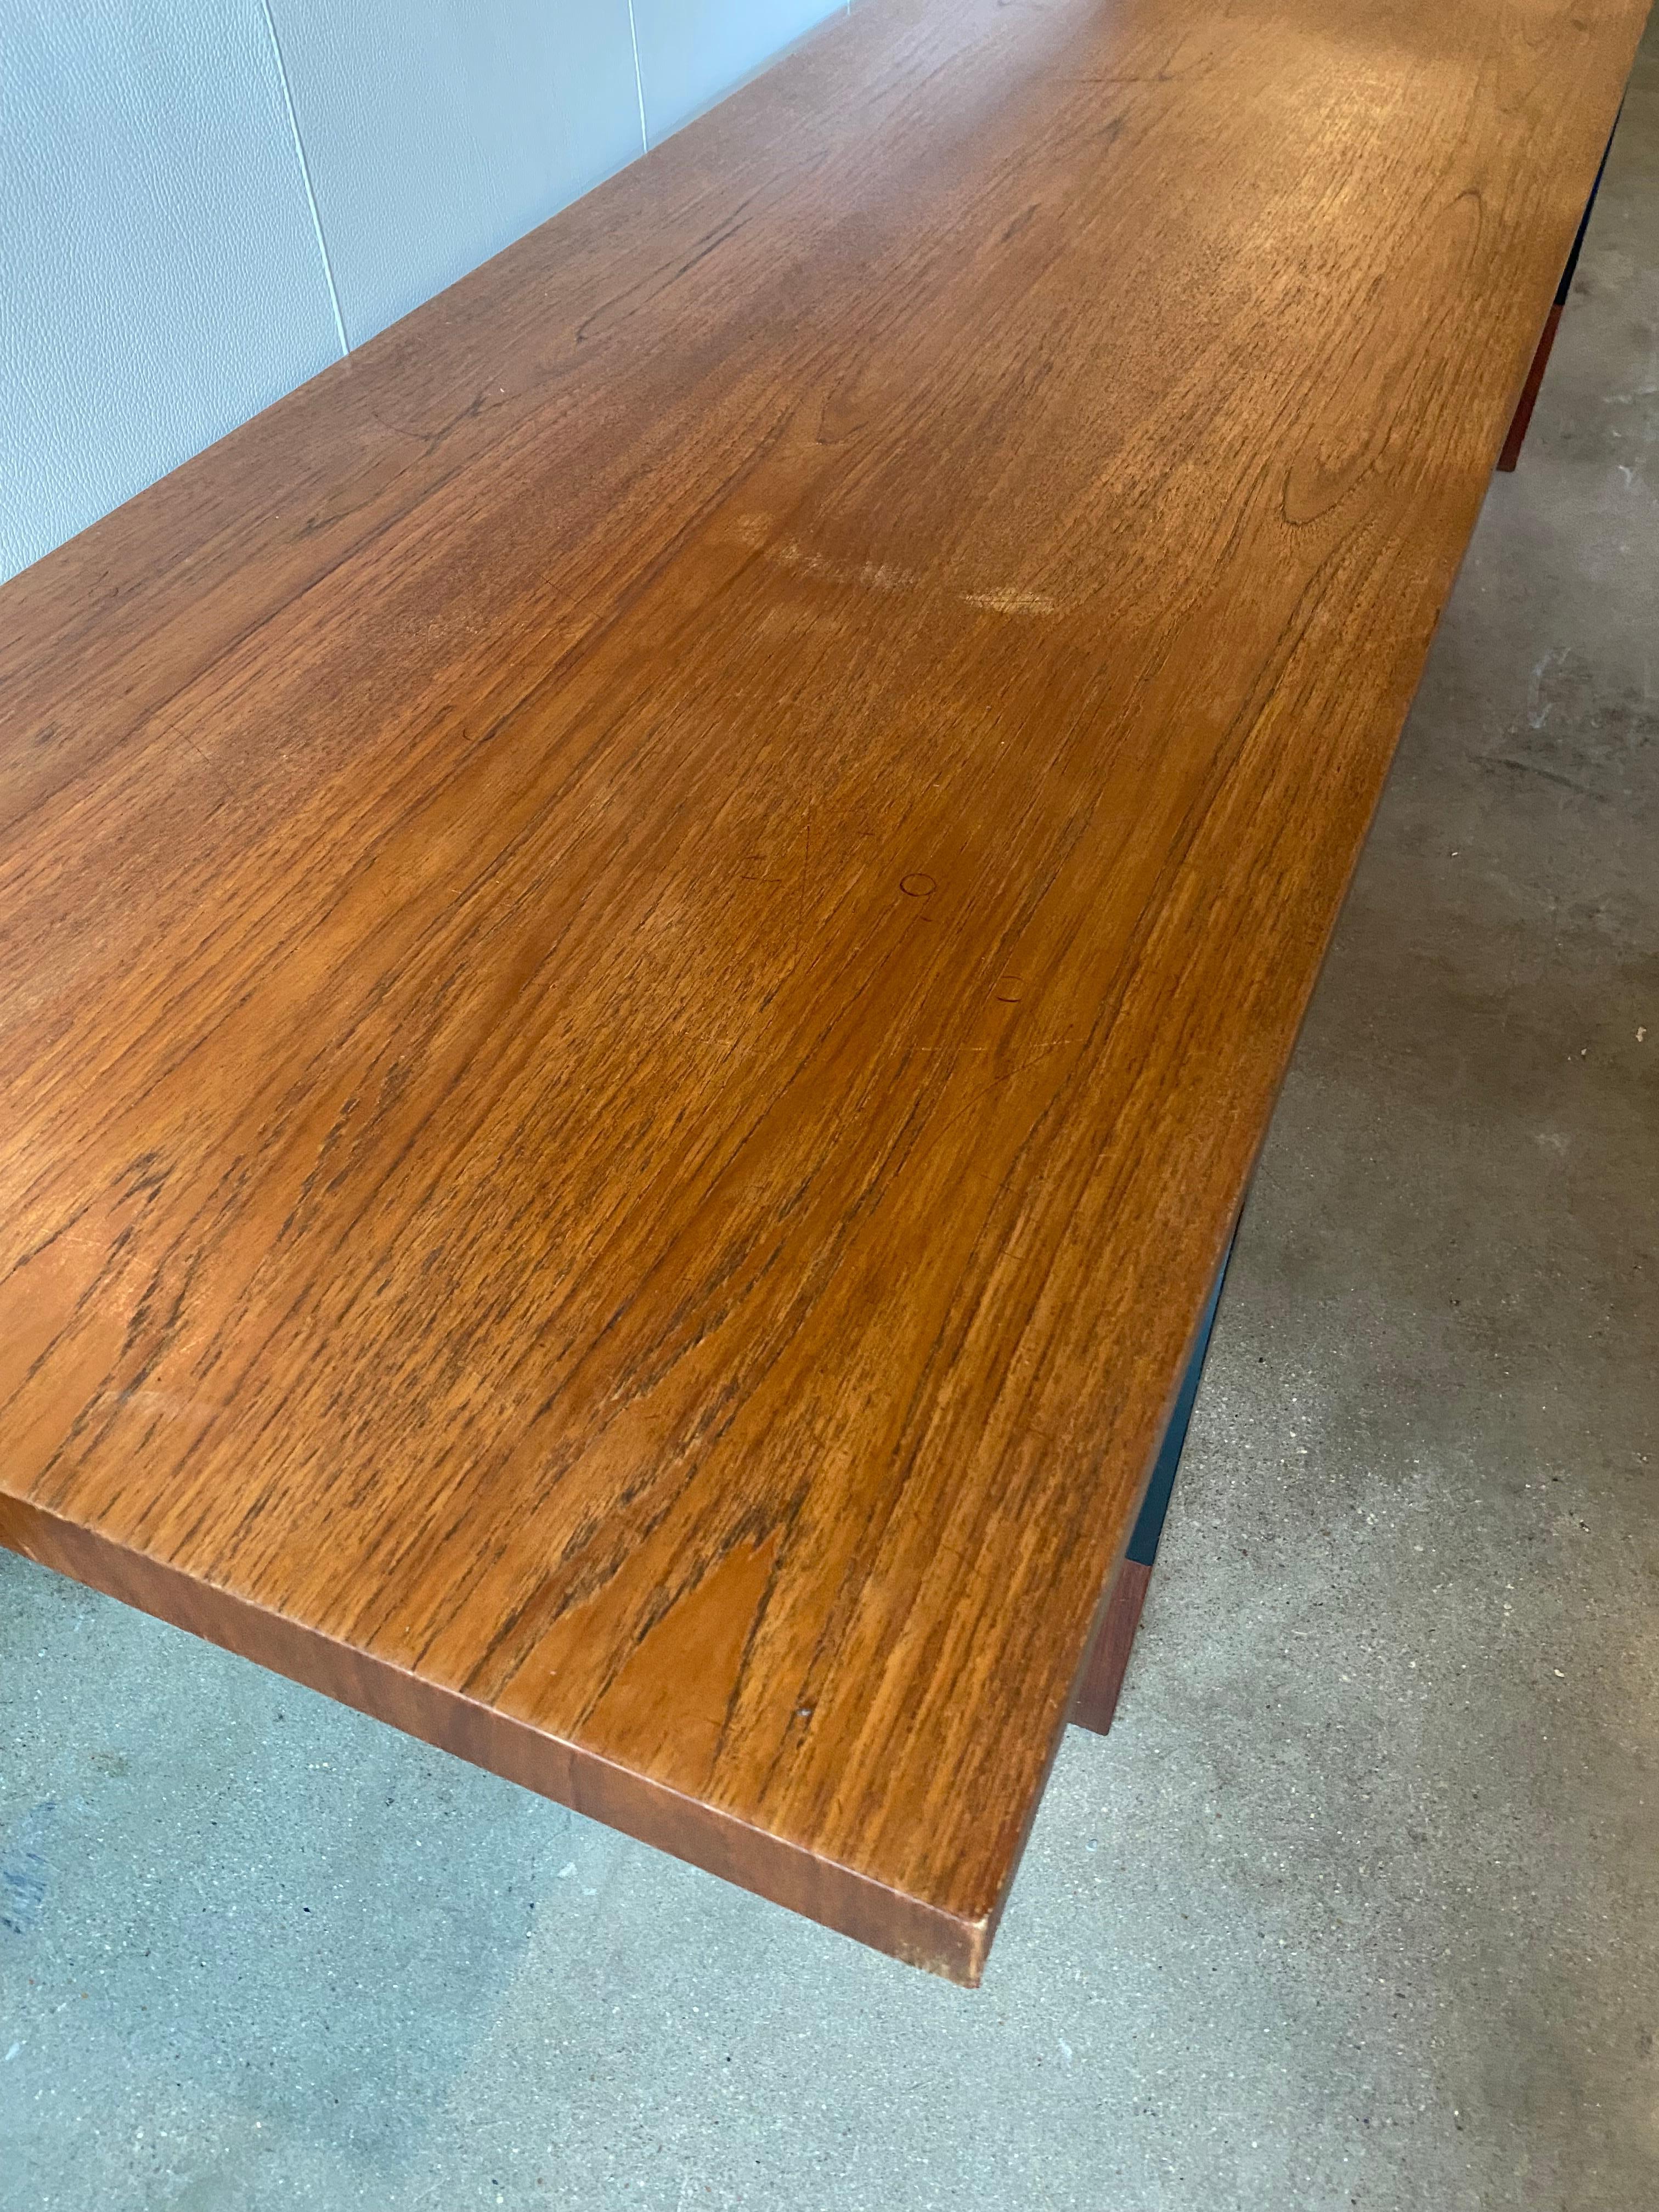 Wood and Steel Mid-Century Table or Bench, Denmark, 1950's In Good Condition For Sale In Austin, TX